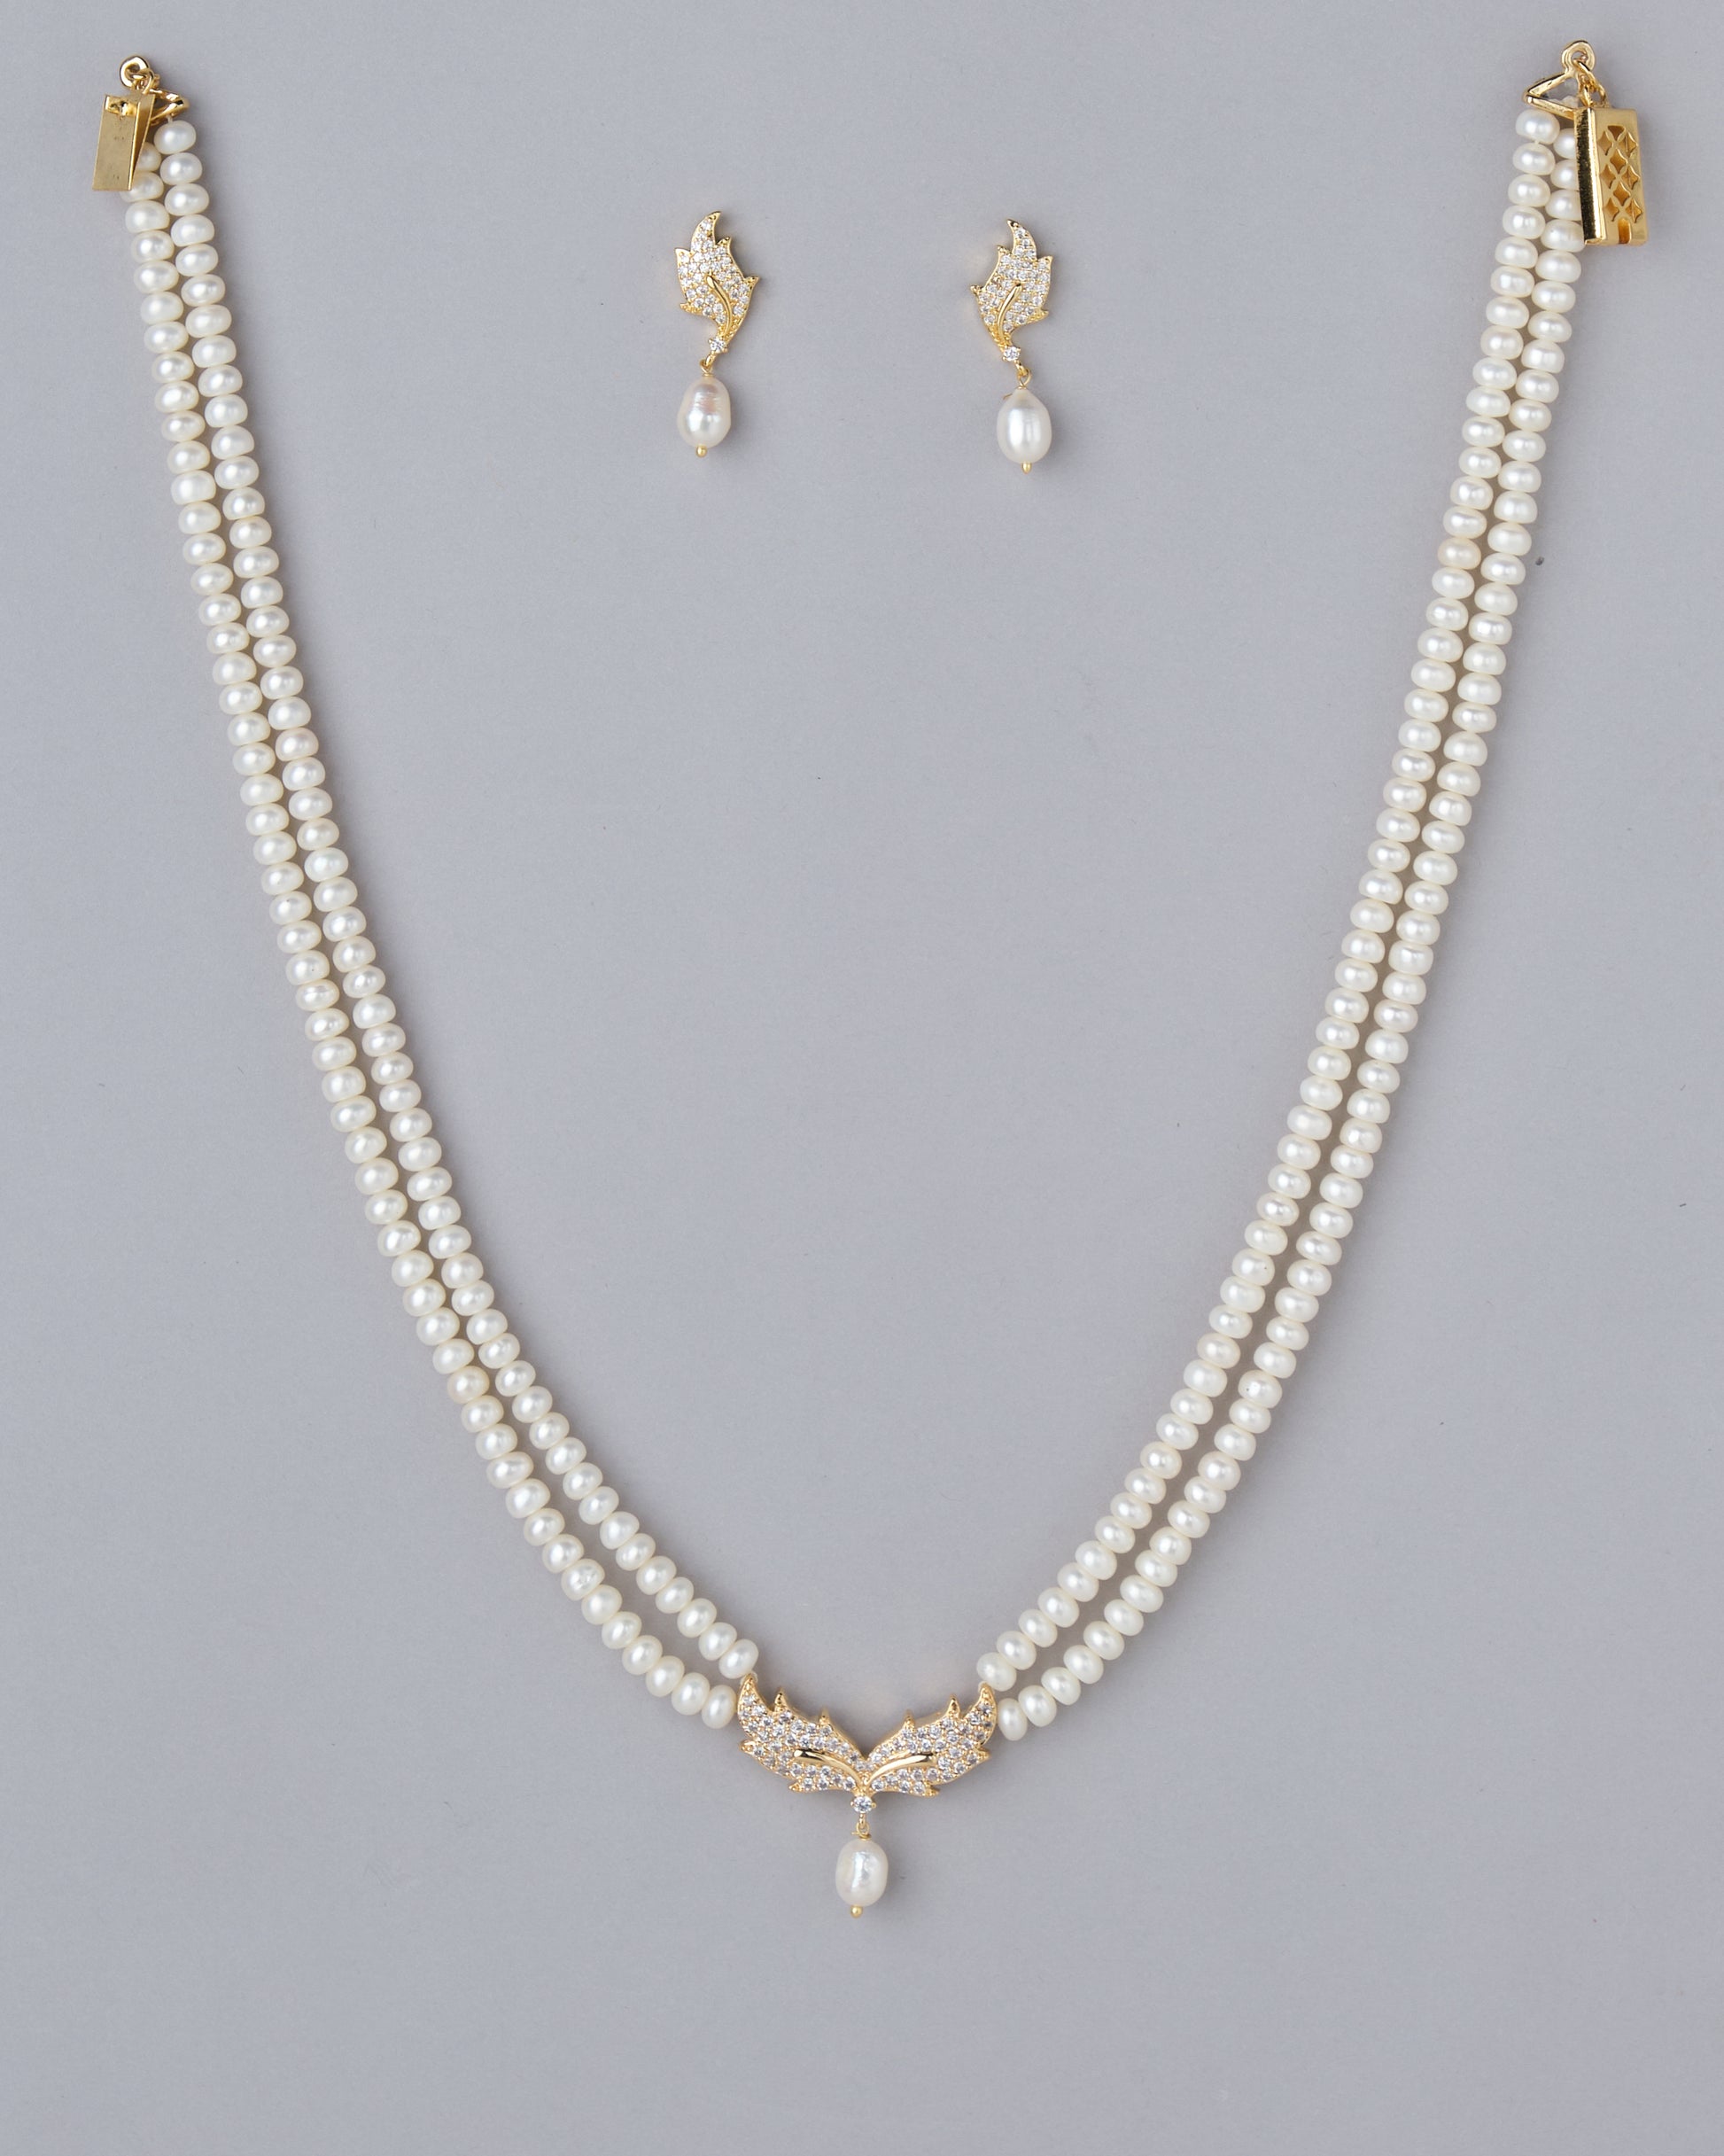 A Mesmerising Leafy Pearl Necklace and earring set from Chandrani Pearls.